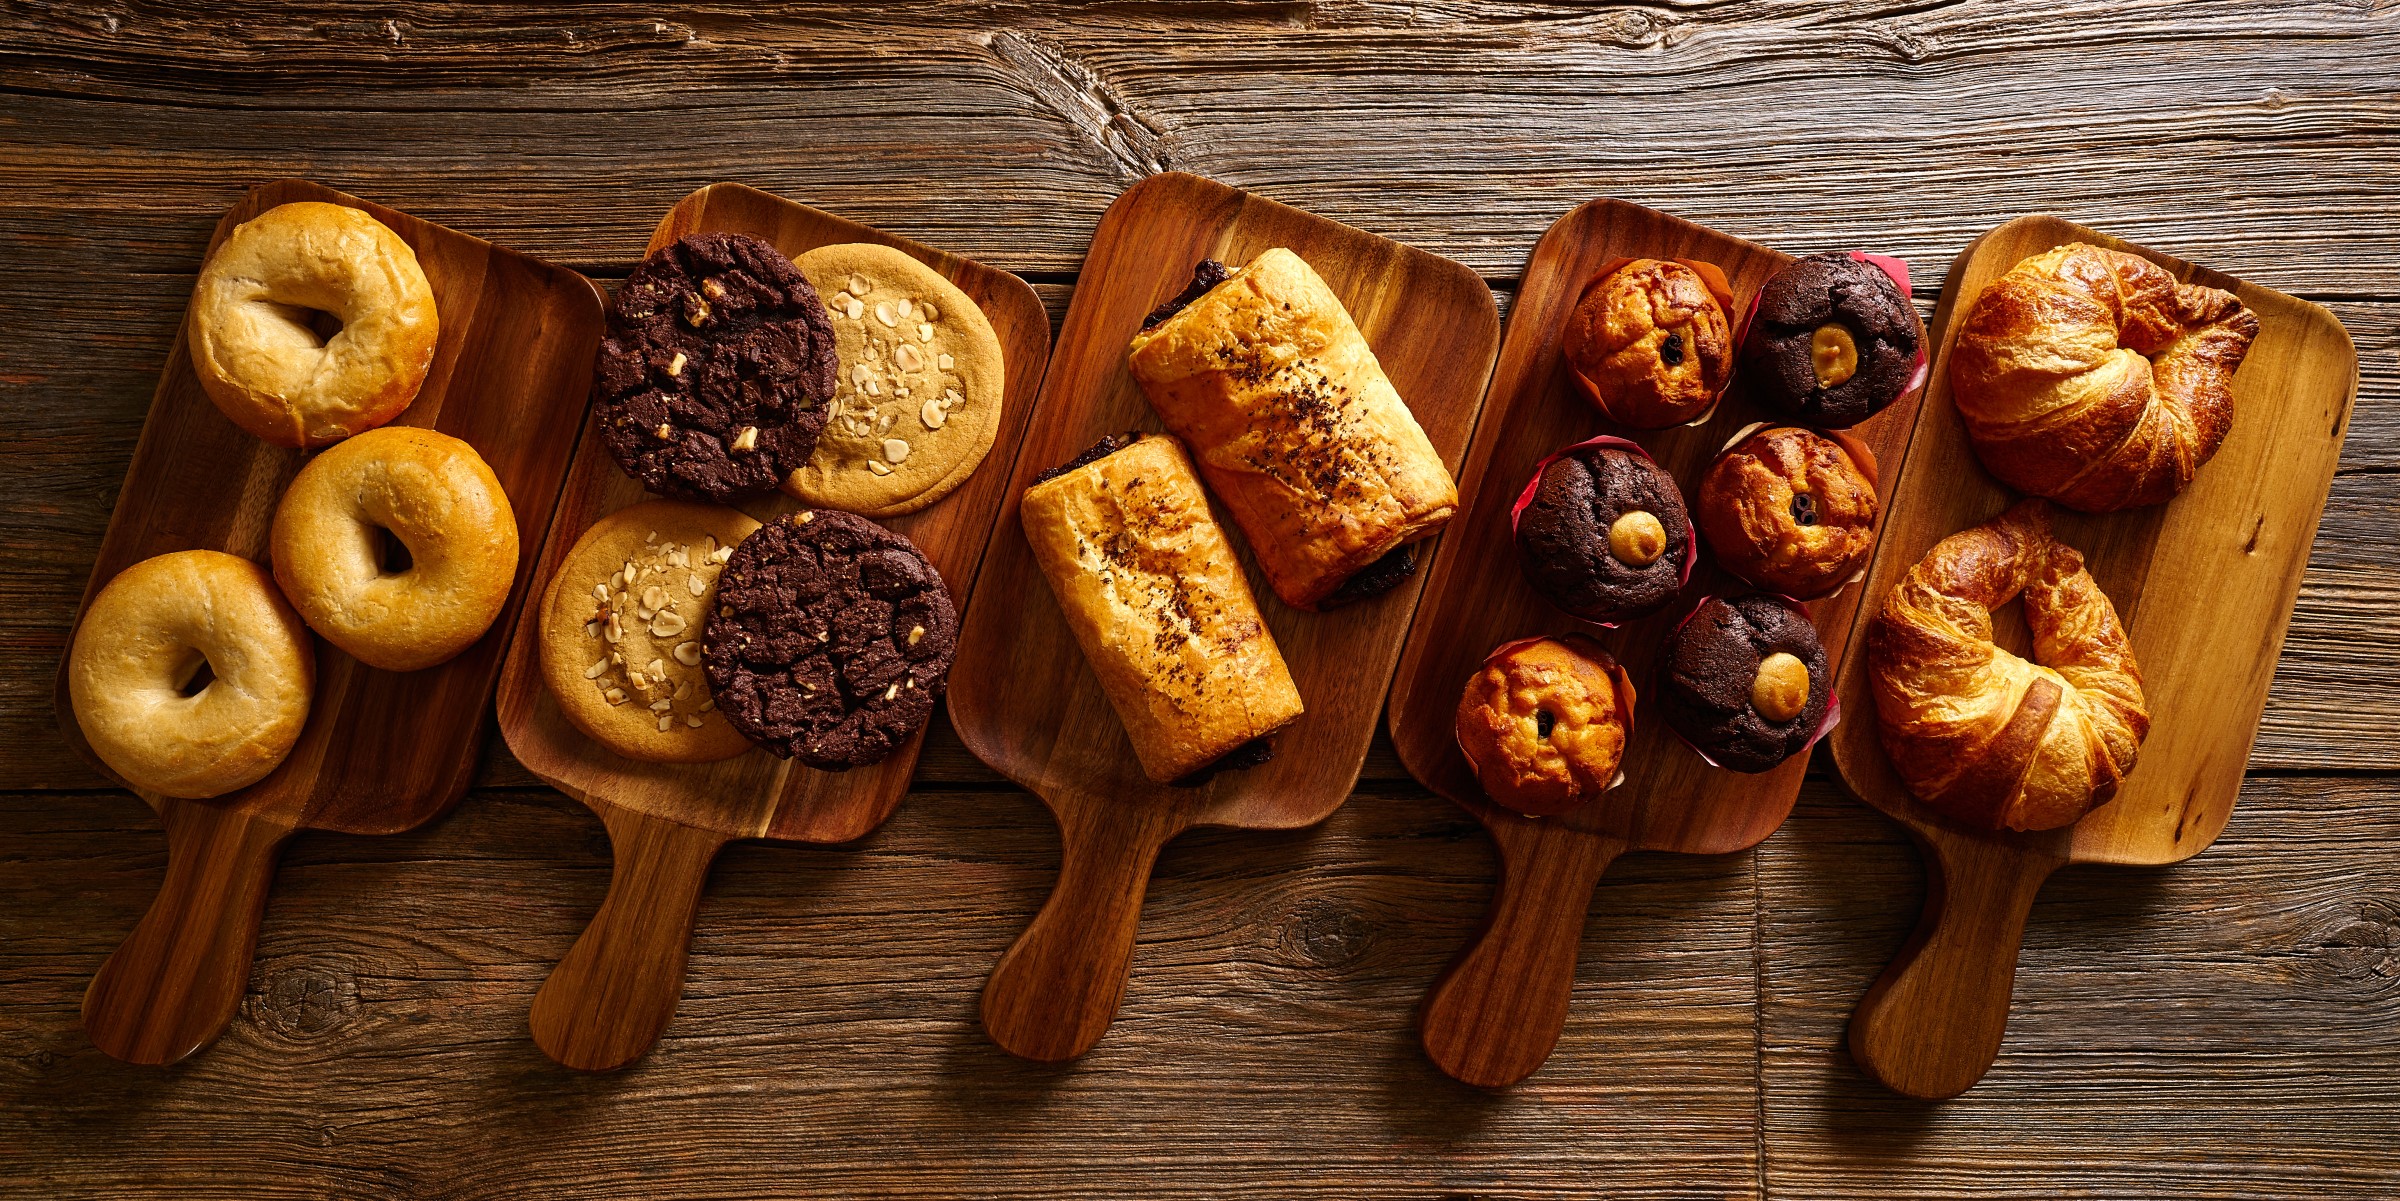 Why not indulge: 3 top consumer trends in the sweet baked goods segment